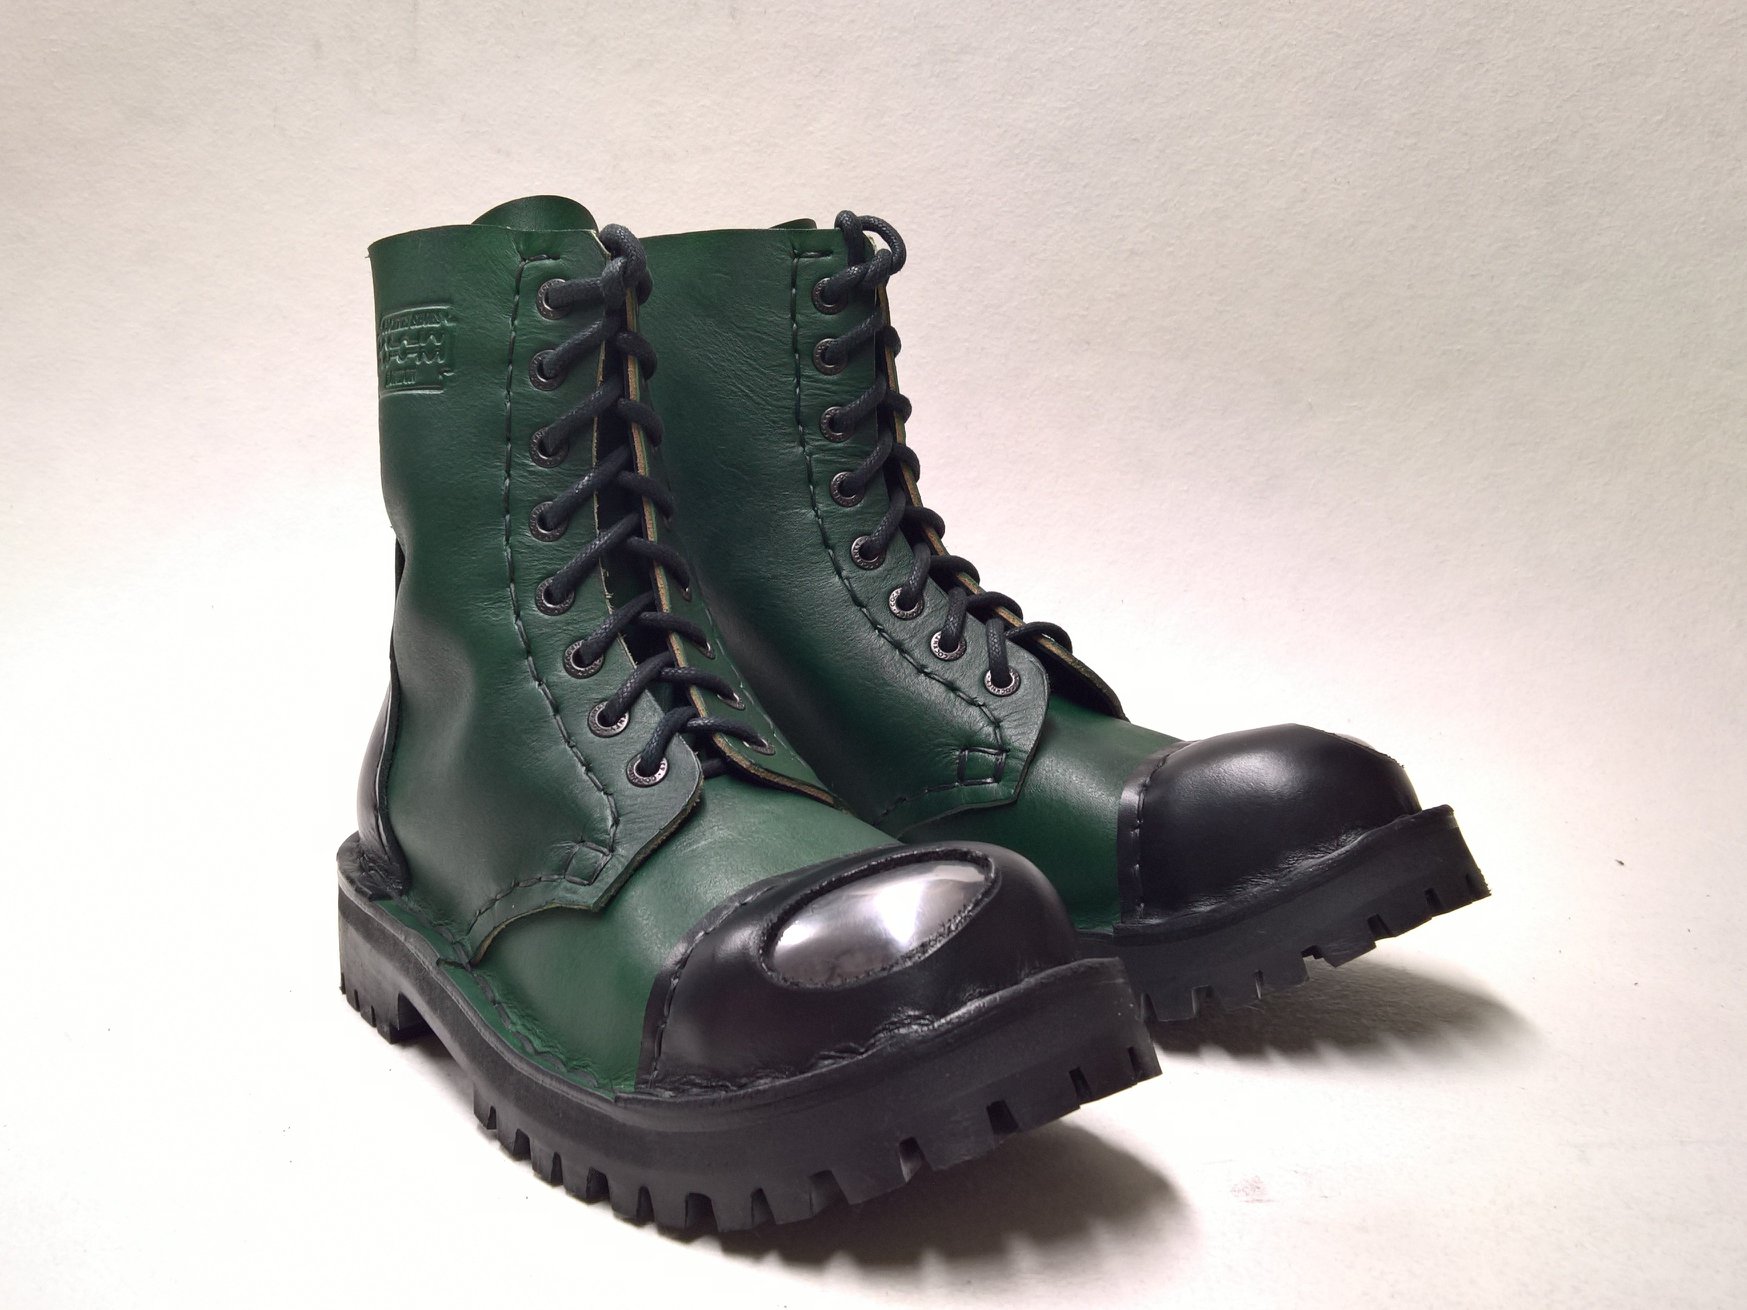 Cockney boots green and black, steel cap